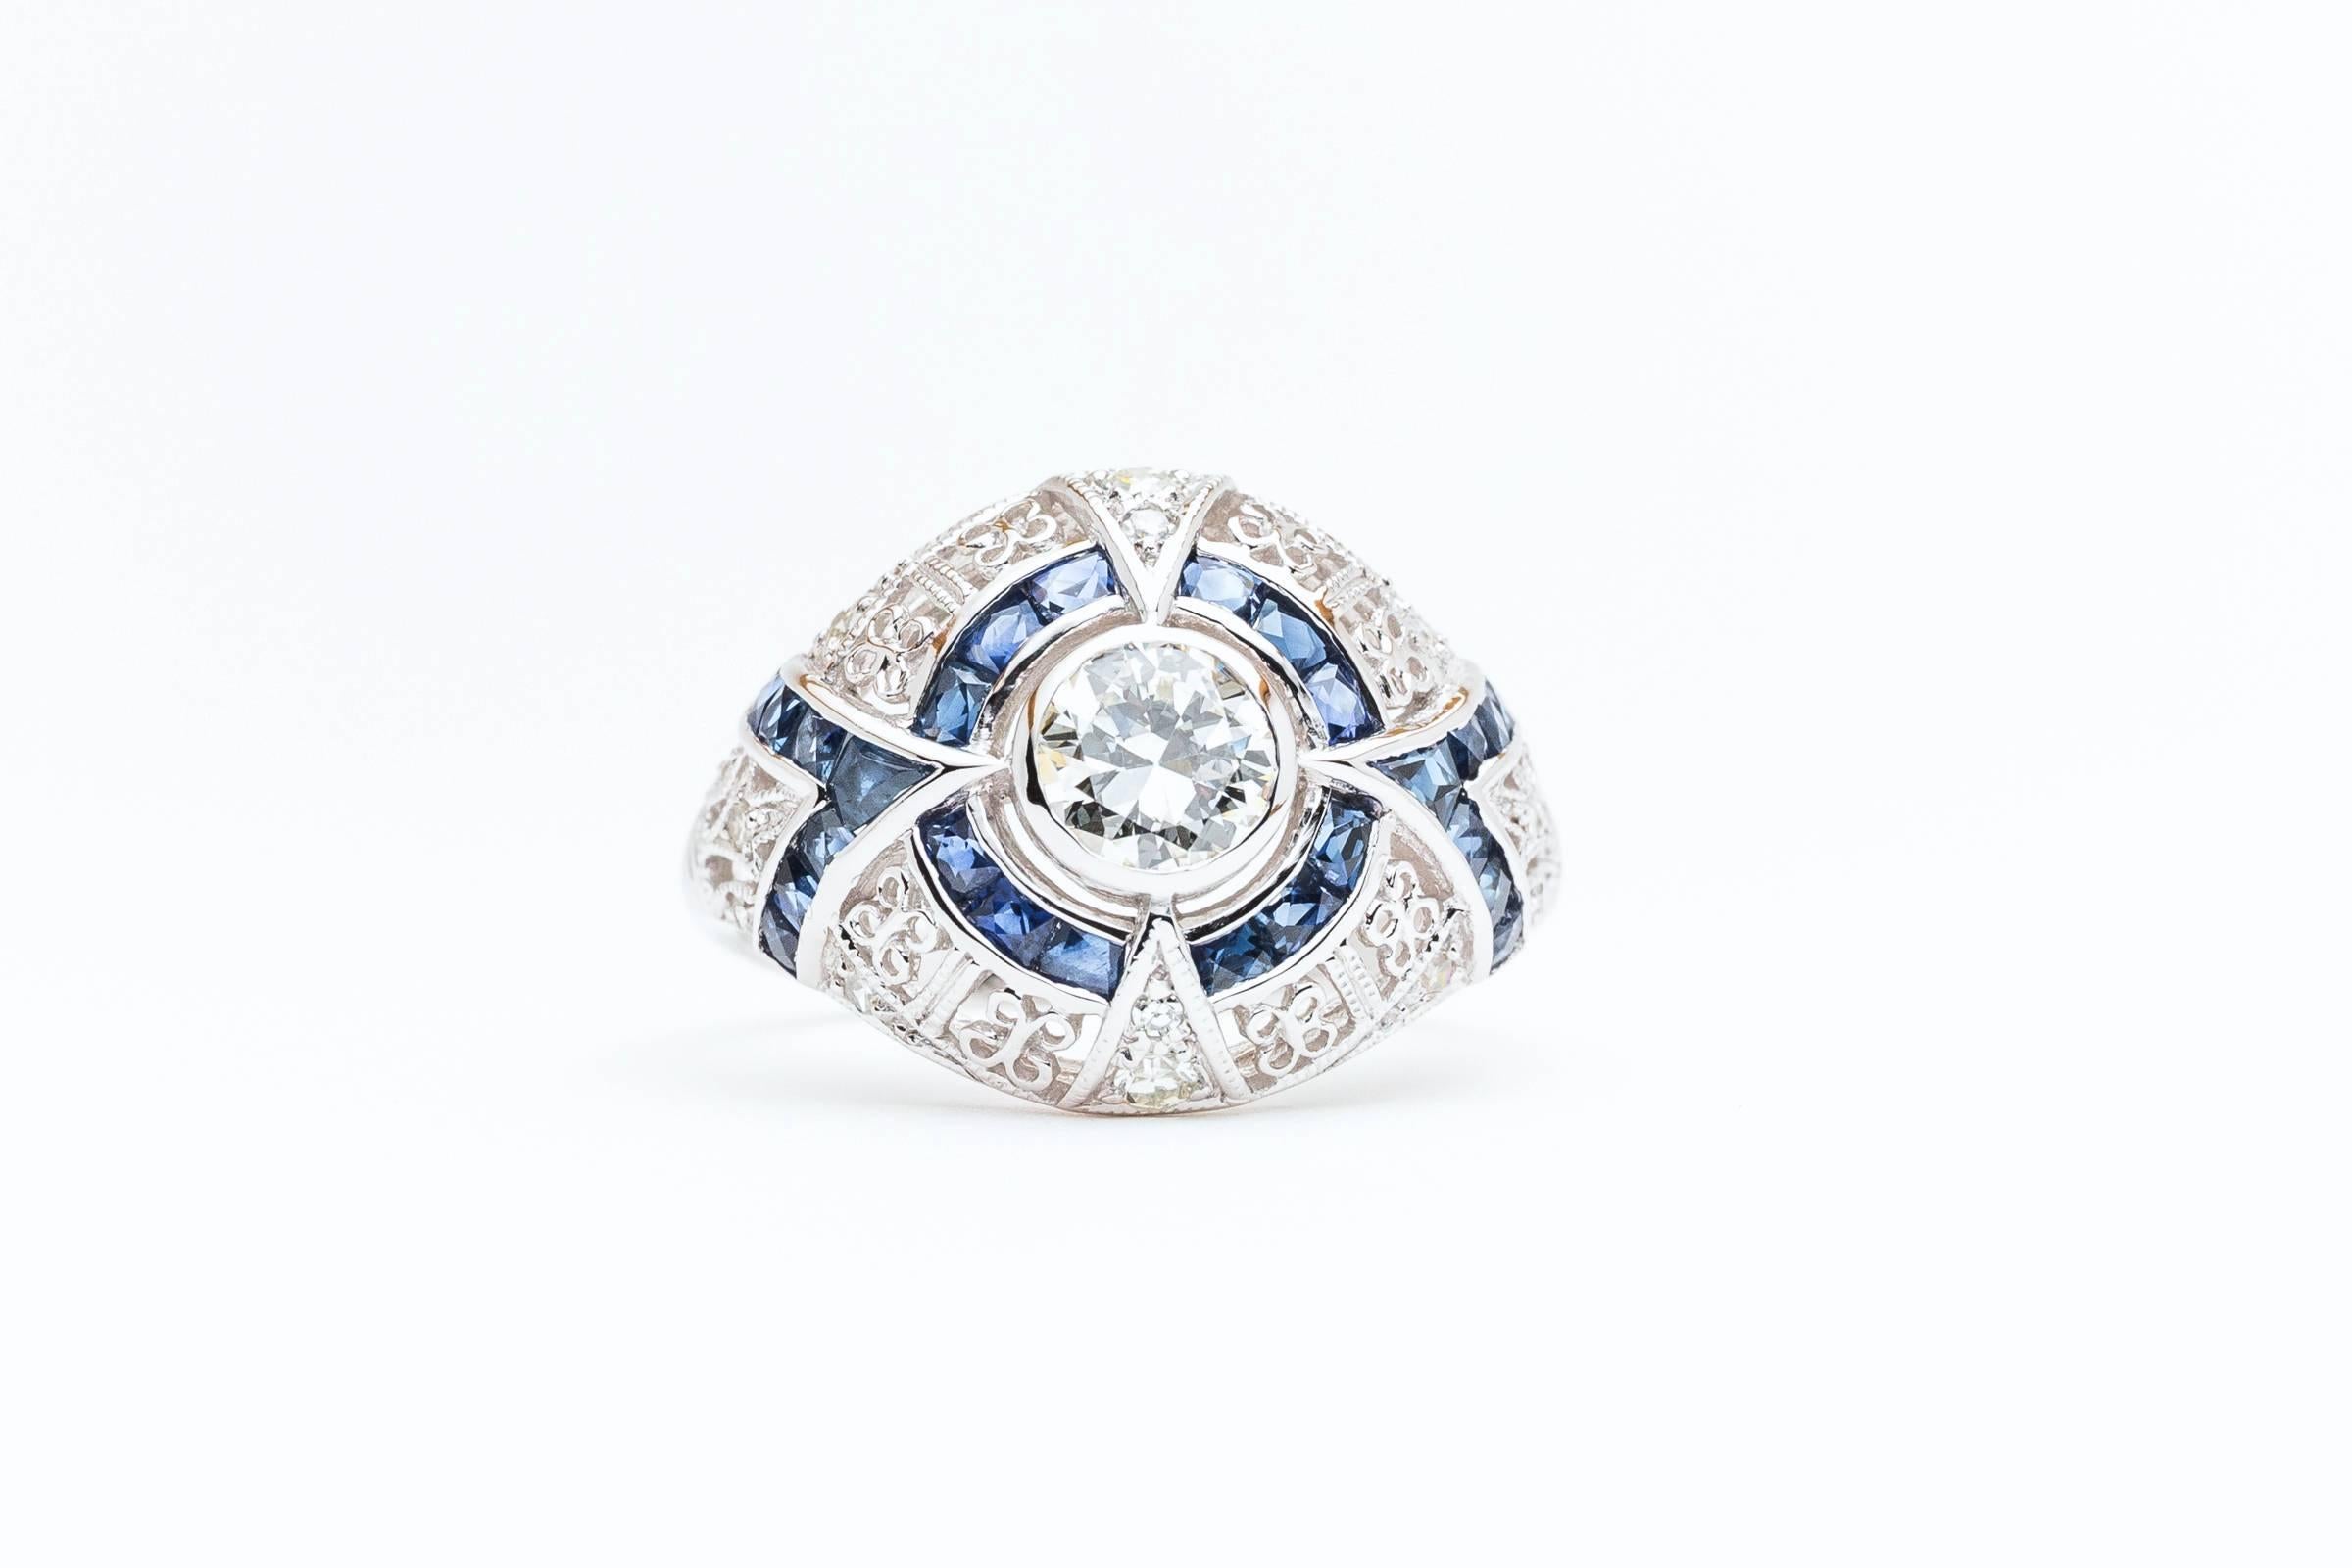 Beacon Hill Jewelers Presents:

A stunning sapphire and diamond engagement ring in 14 karat white gold. Centered by a sparkling antique mine cut diamond of 0.60 carats, this stunning ring is set throughout with hand calibre cut sapphires, and